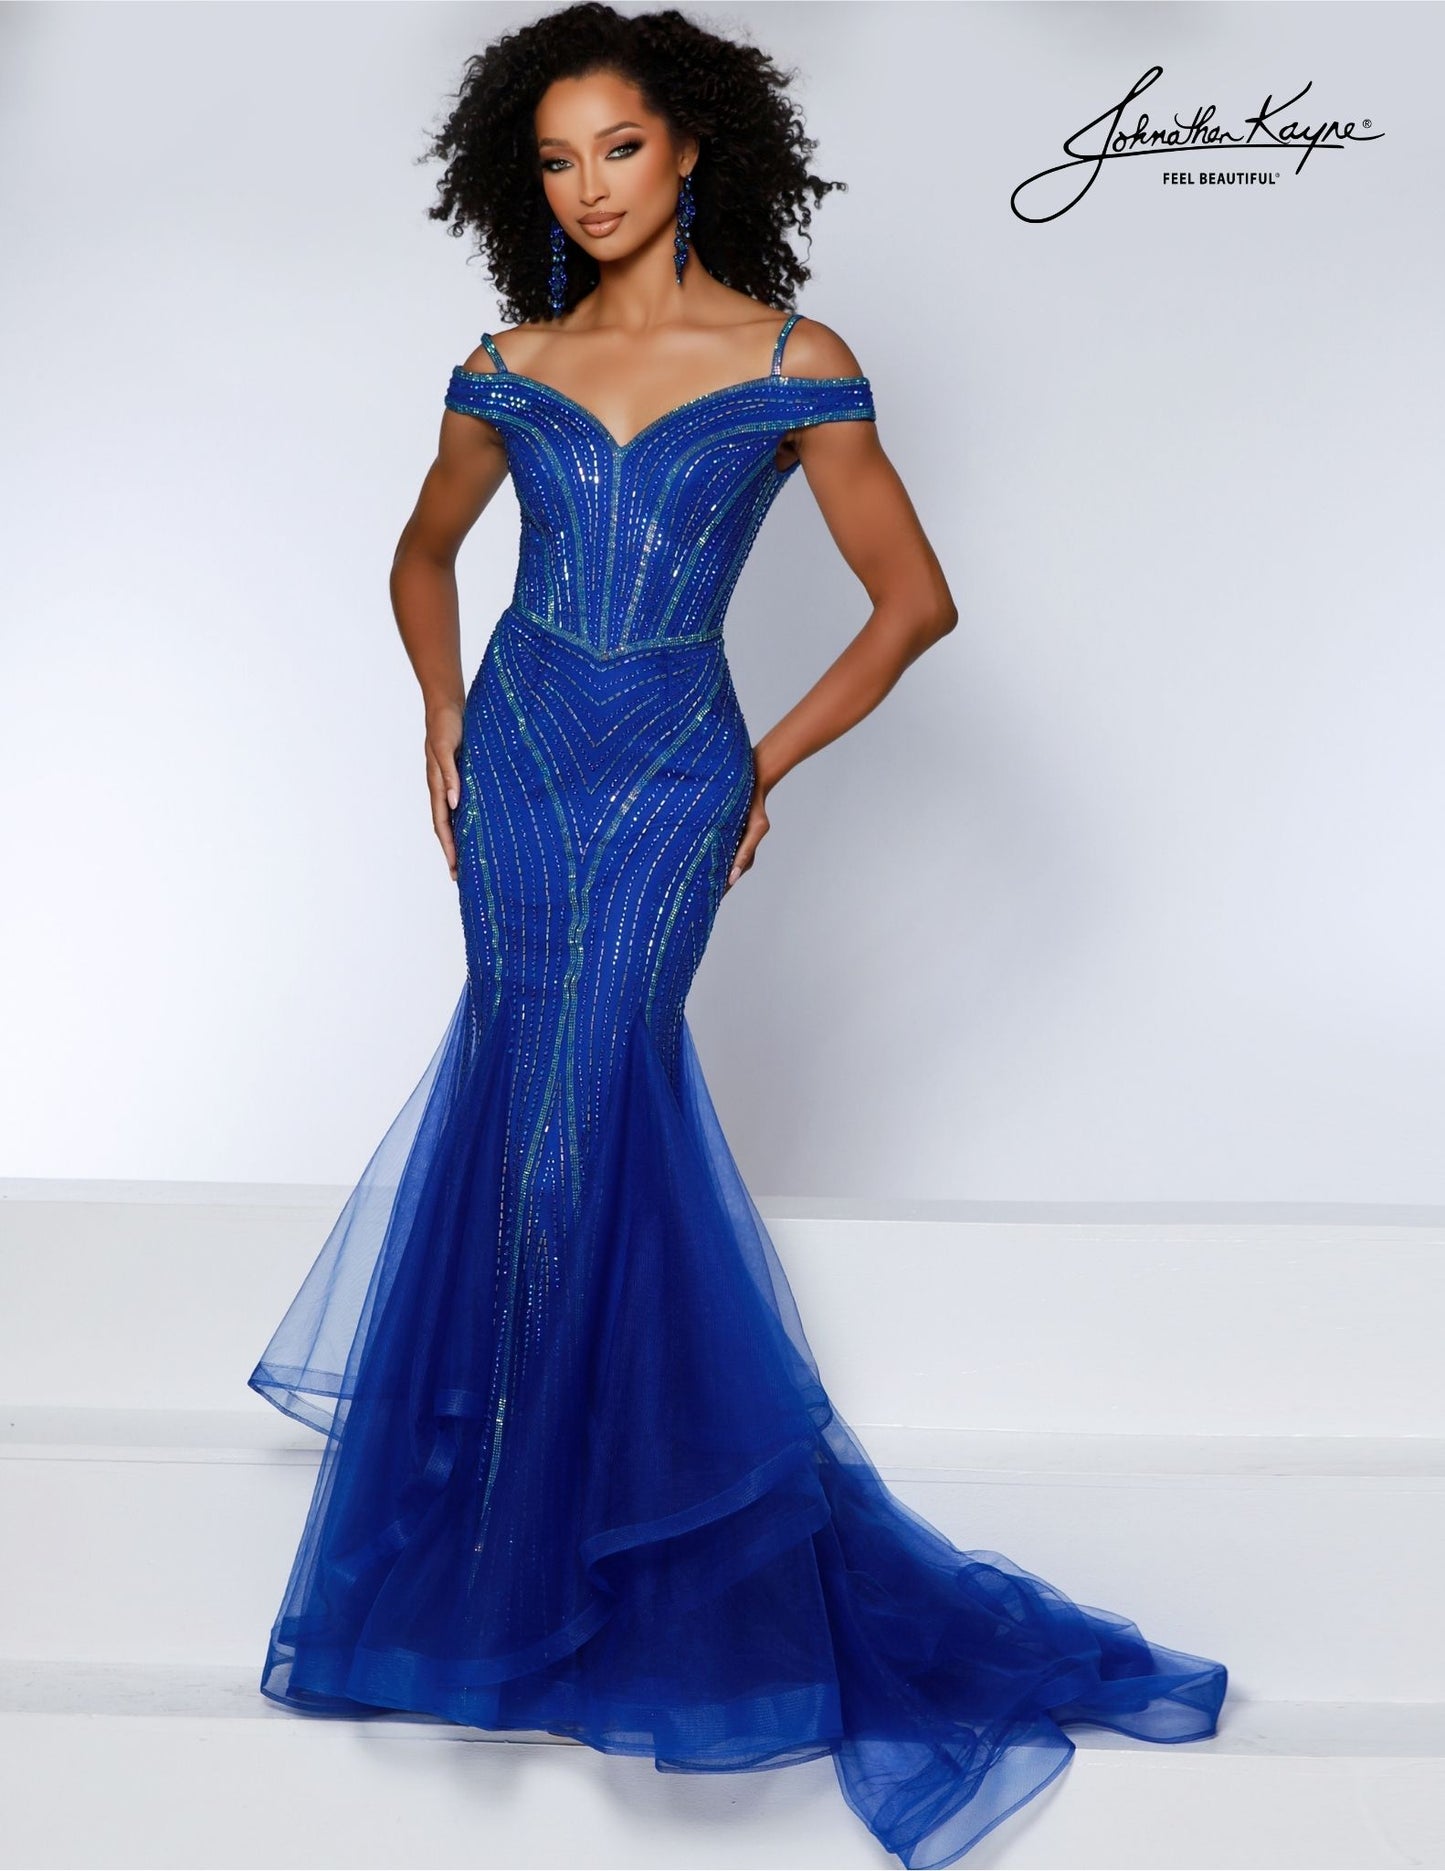 Johnathan Kayne 2866 offers an elegant off-shoulder fitted mermaid silhouette gown. It has intricate beadwork, mesh accents, and a full-length train. Crafted for special occasions, this timelessly beautiful dress will make you shine on your special night. Turn heads, ignite envy! This off-the-shoulder mermaid gown is your ticket to being the star of the show.